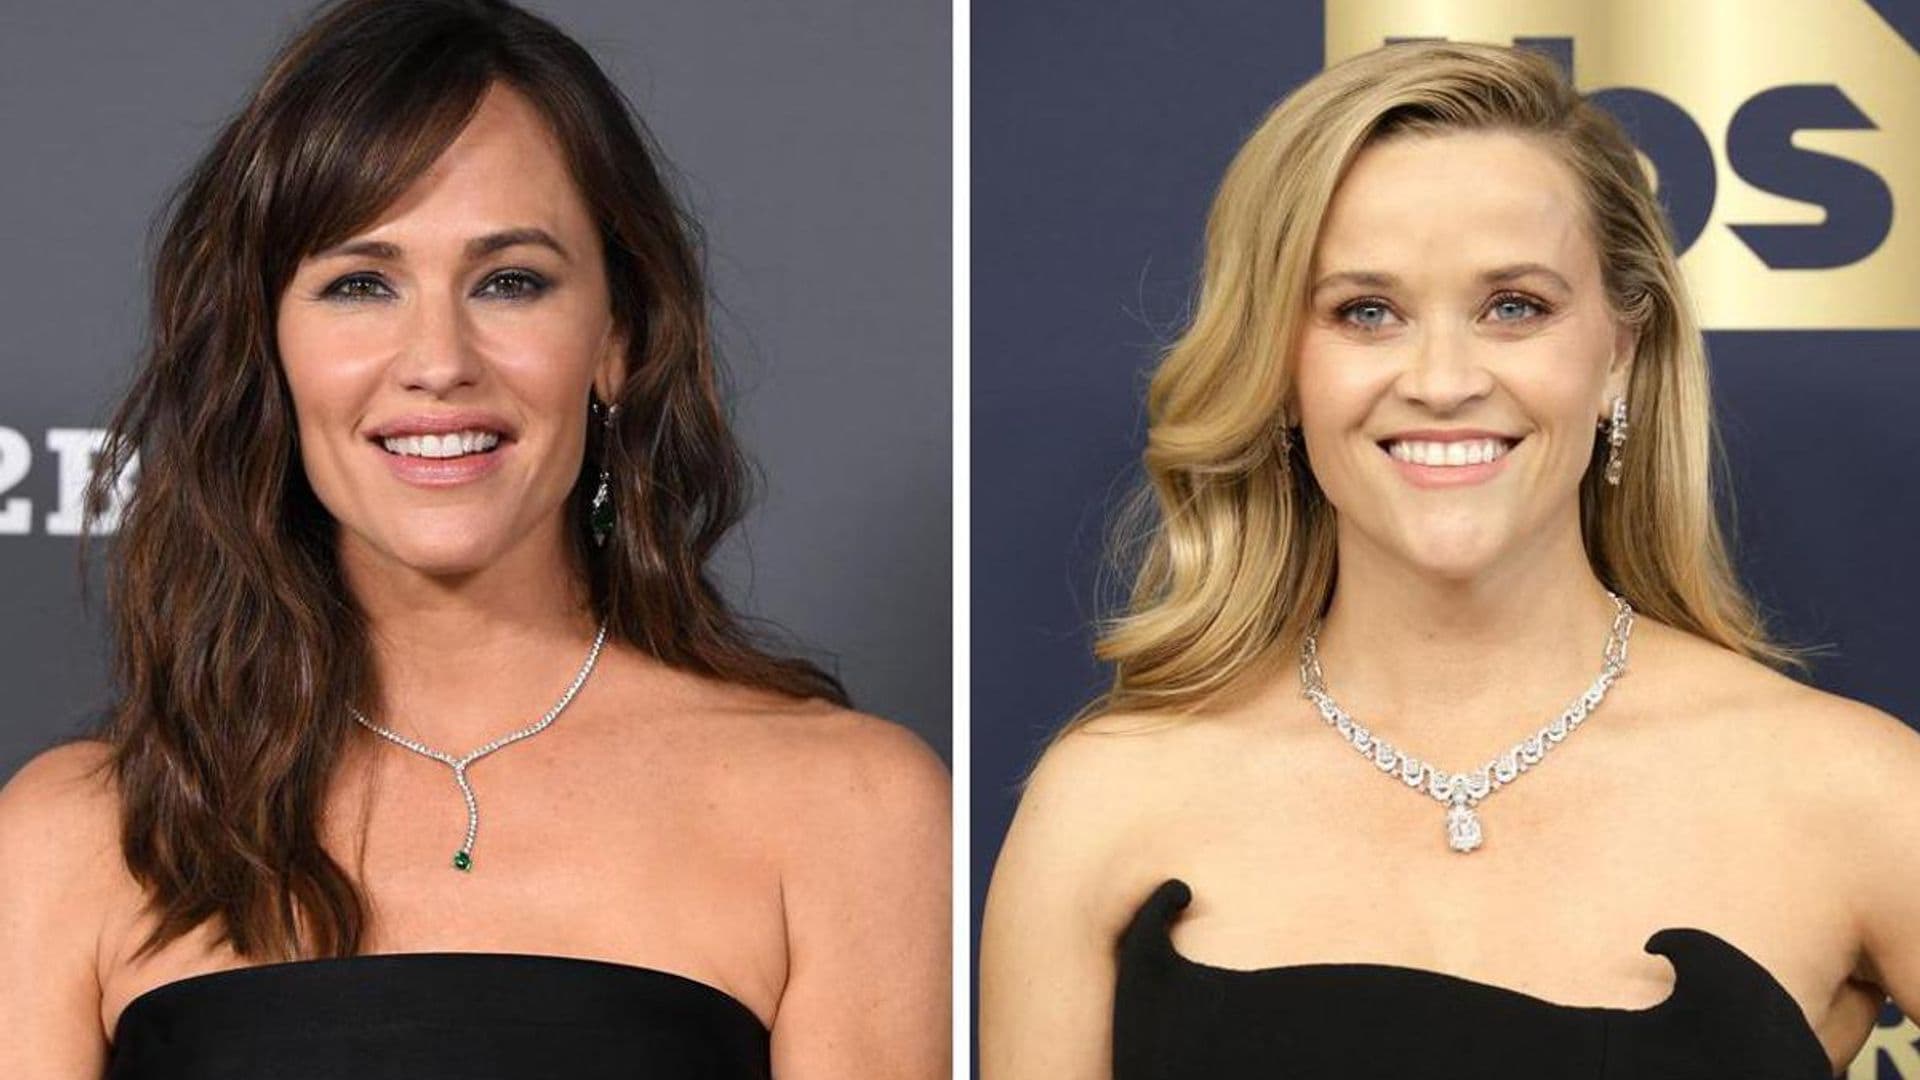 Jennifer Garner shares the special gift she’s giving Reese Witherspoon for her birthday